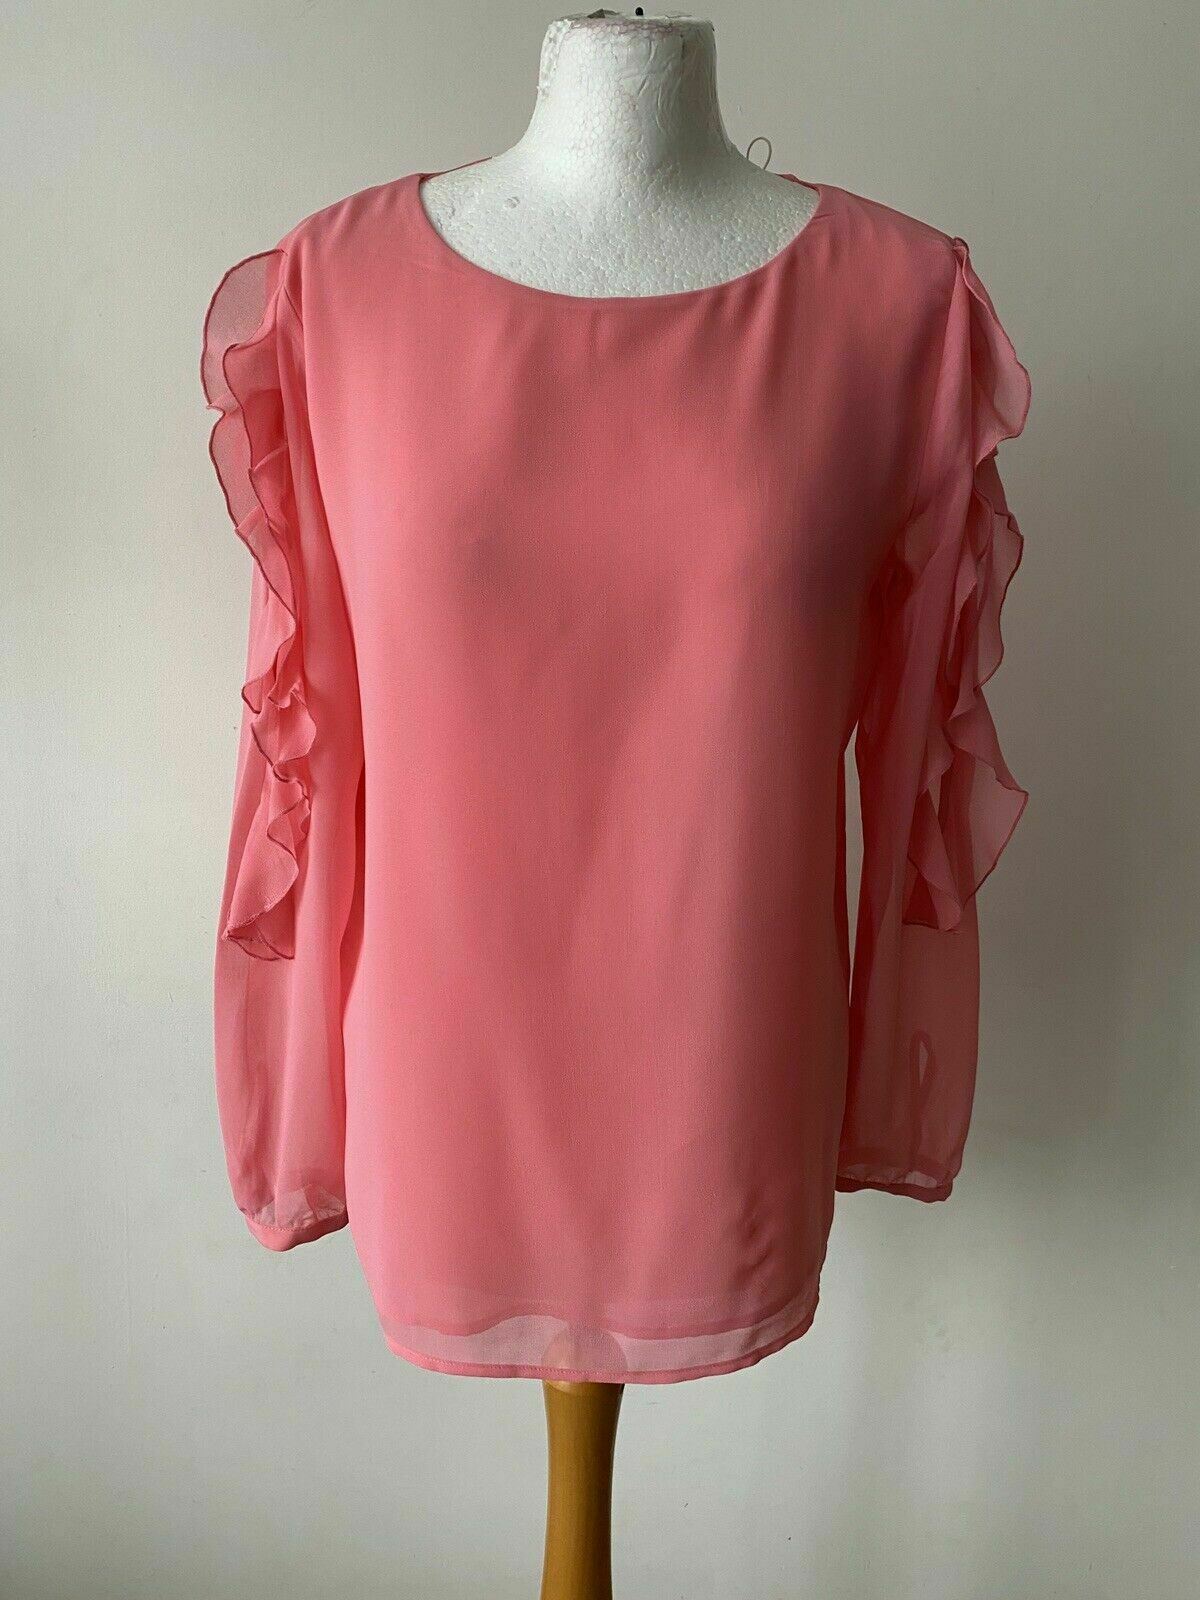 Esprit Pink Blouse Size 12 Ruffle Sleeves